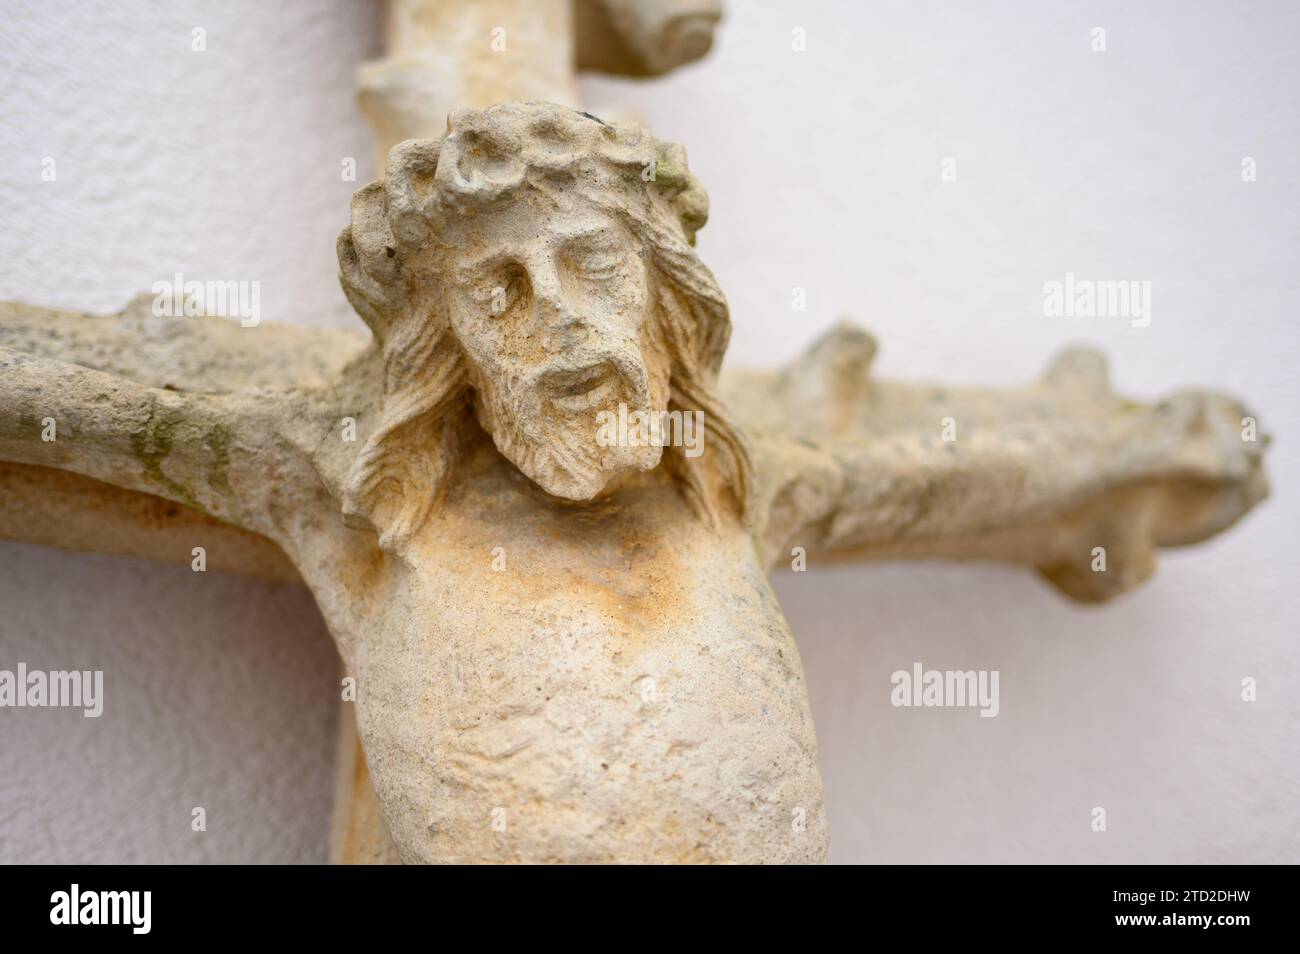 Sculpture of the Crucifixion. Église Saint-Laurent (St Lawrence's Church), Strassen, Luxembourg. Stock Photo